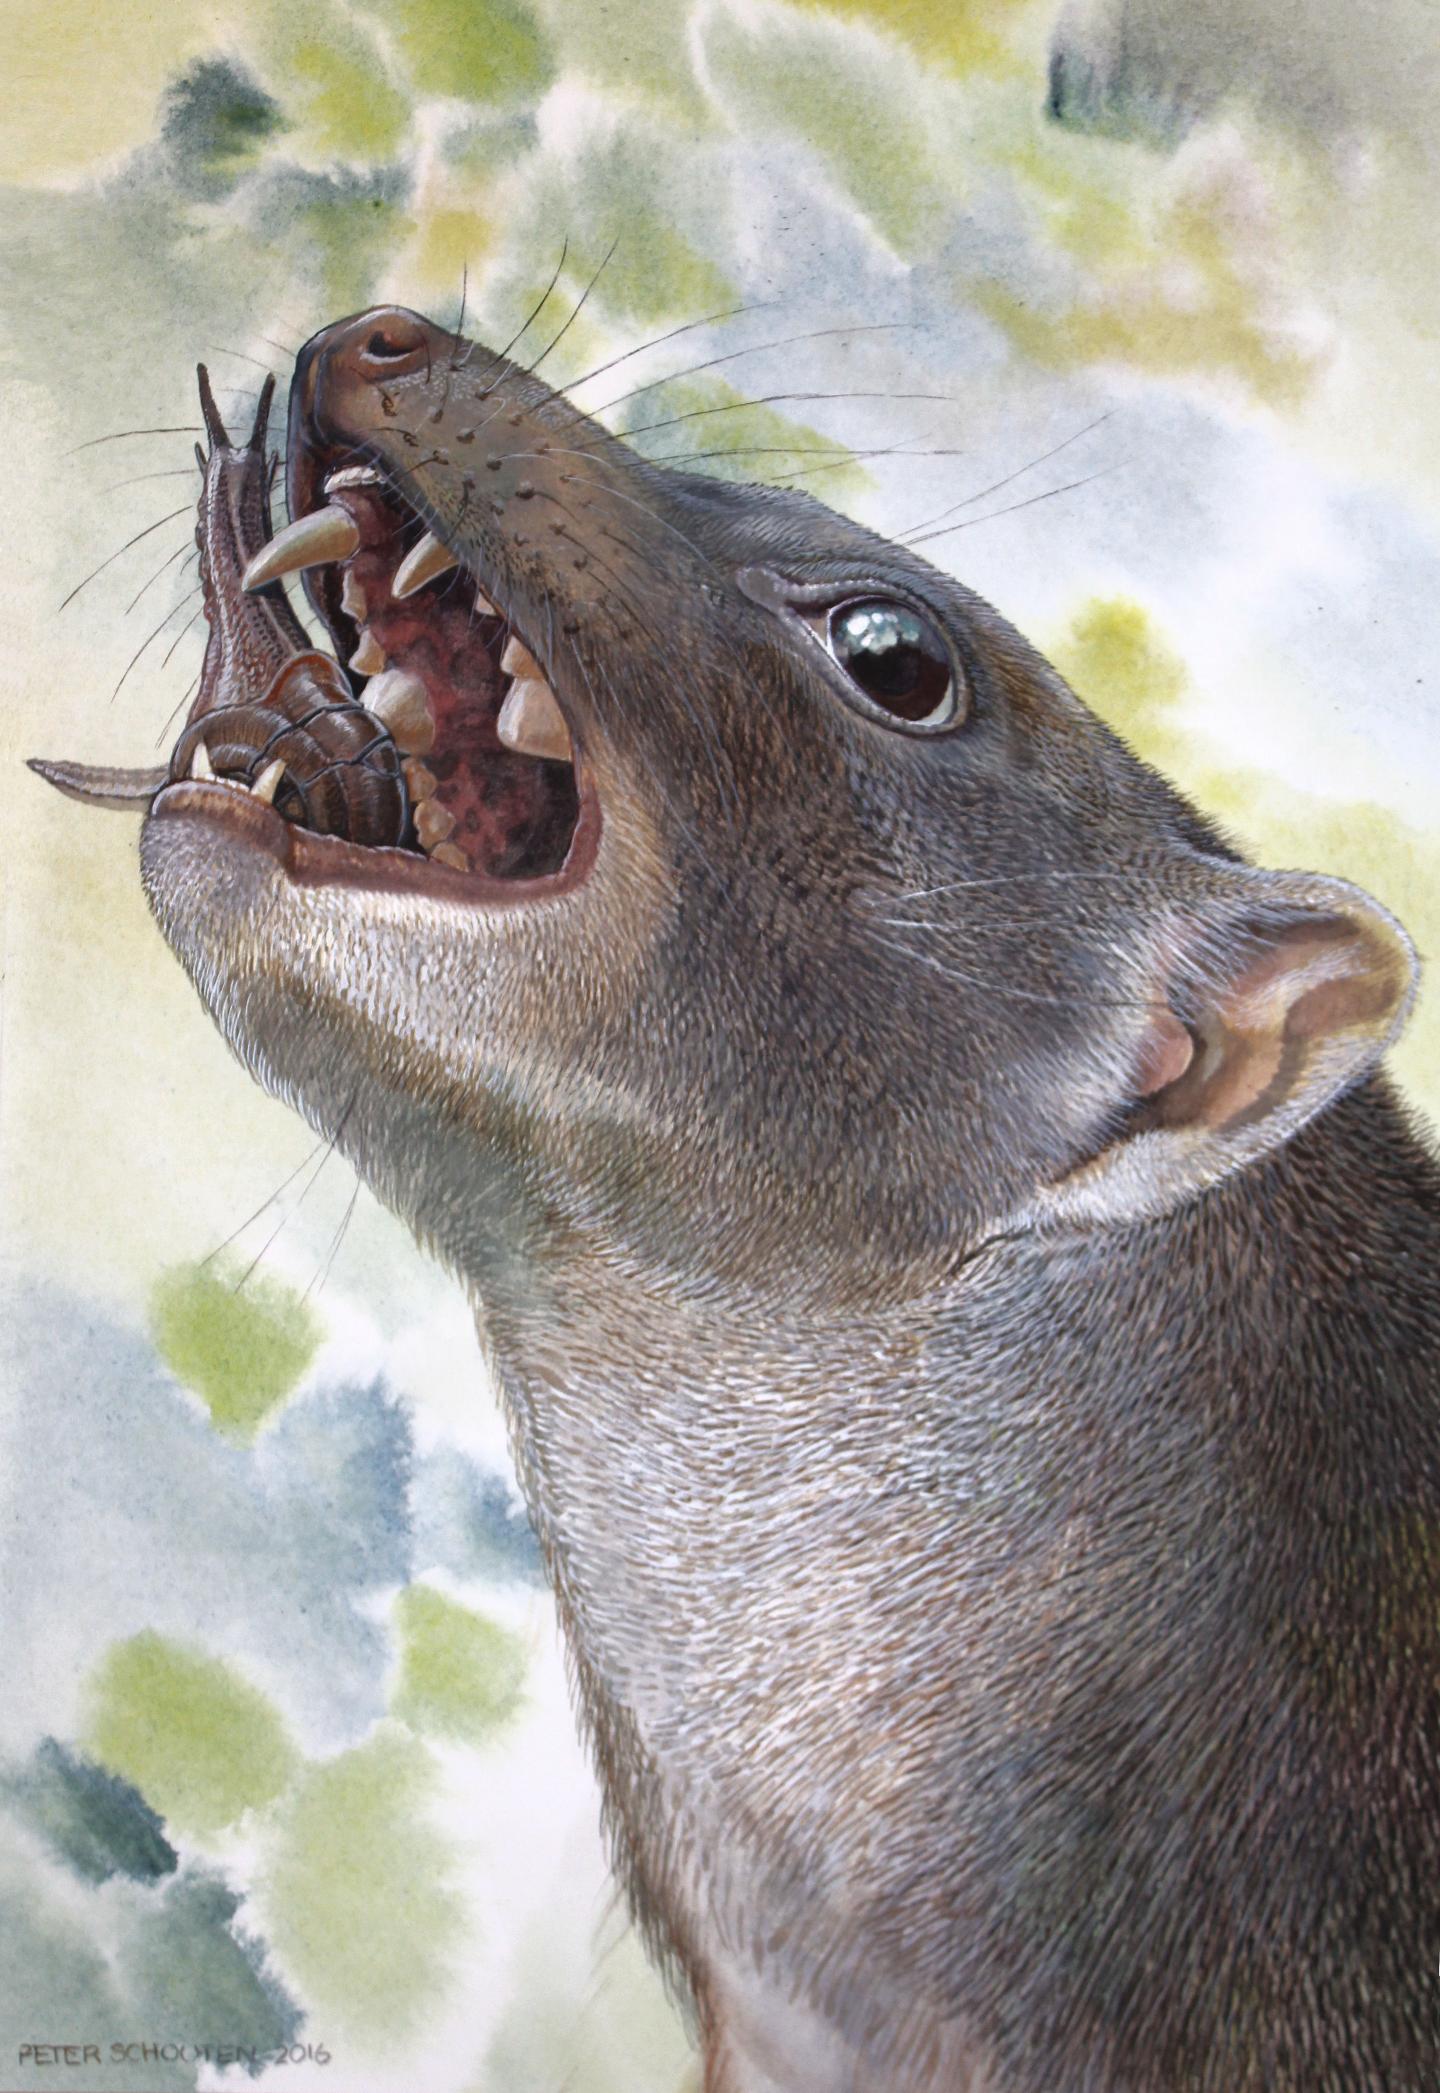 Artist's Impression of the Snail-Eating Marsupial